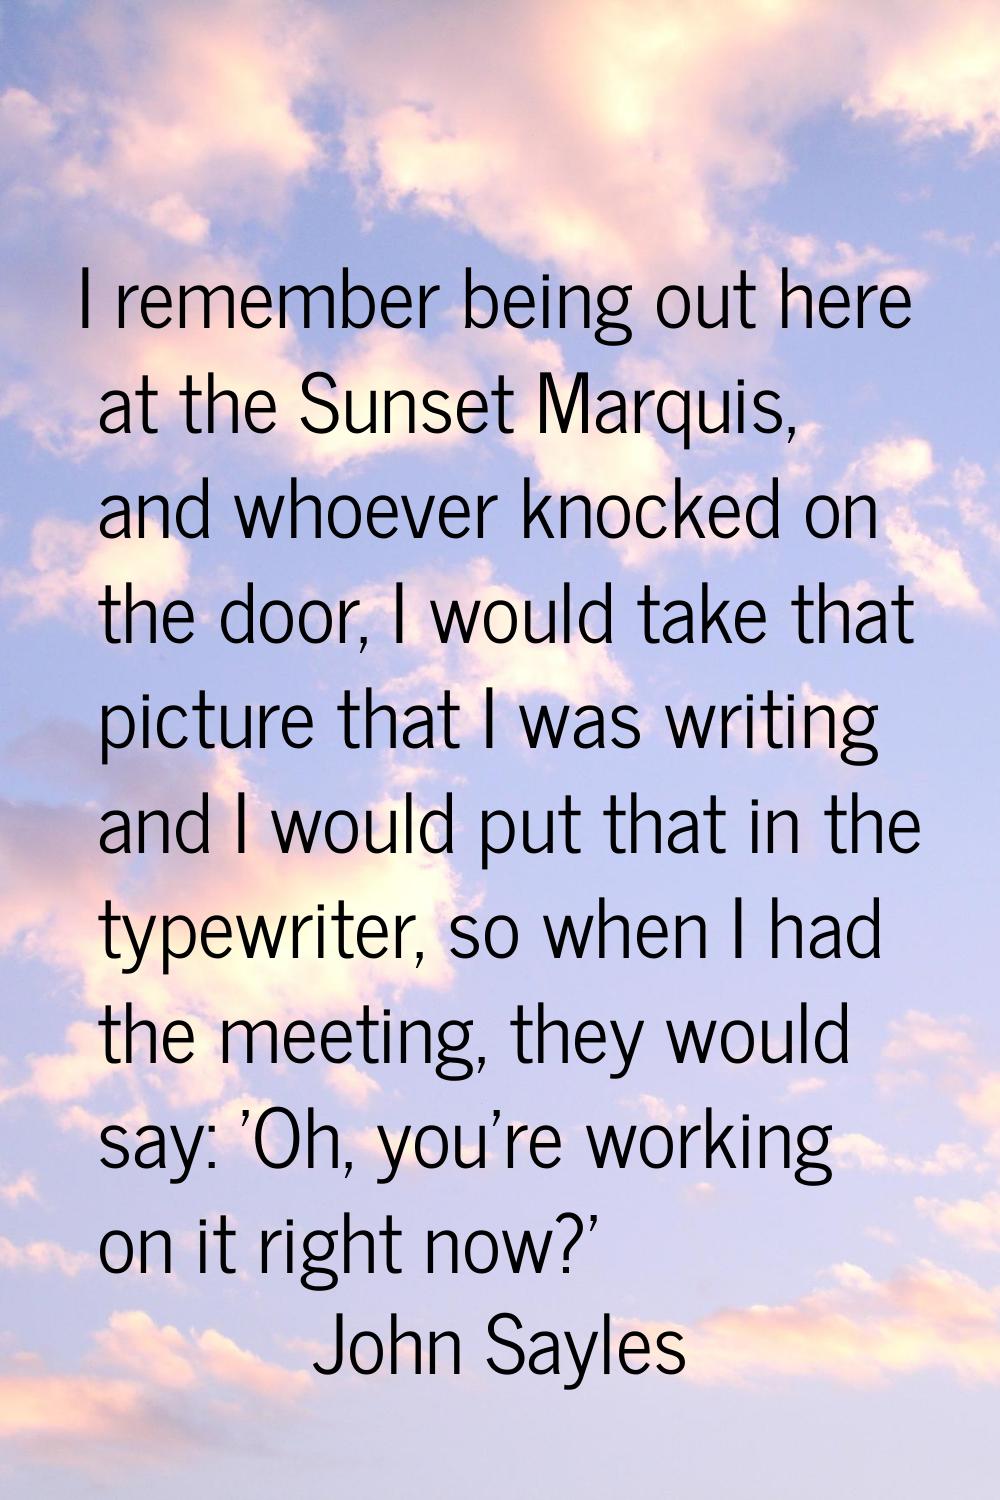 I remember being out here at the Sunset Marquis, and whoever knocked on the door, I would take that